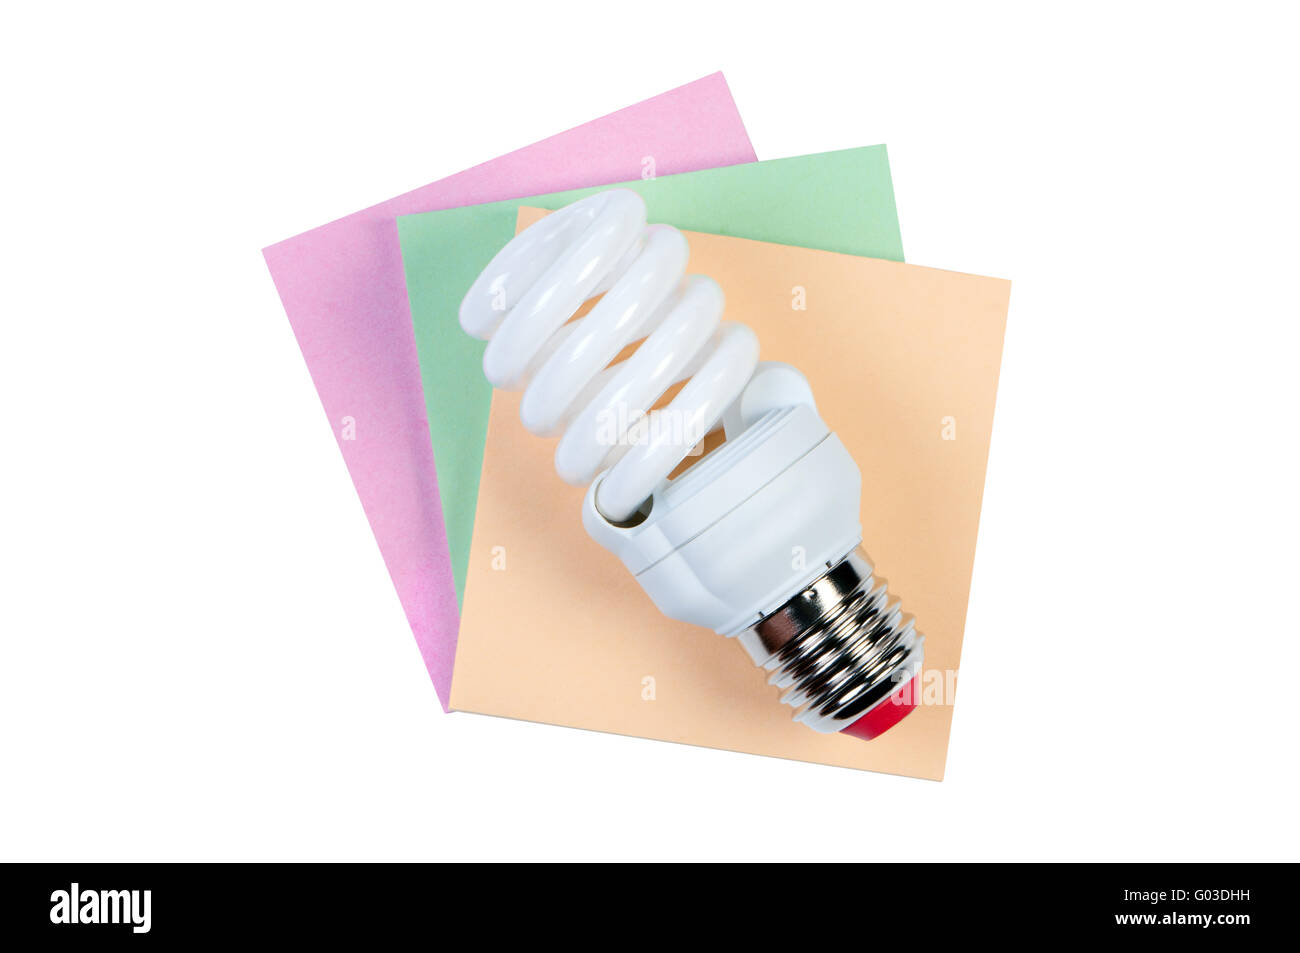 Energy saving lamp and color stickers isolated on white background. Stock Photo